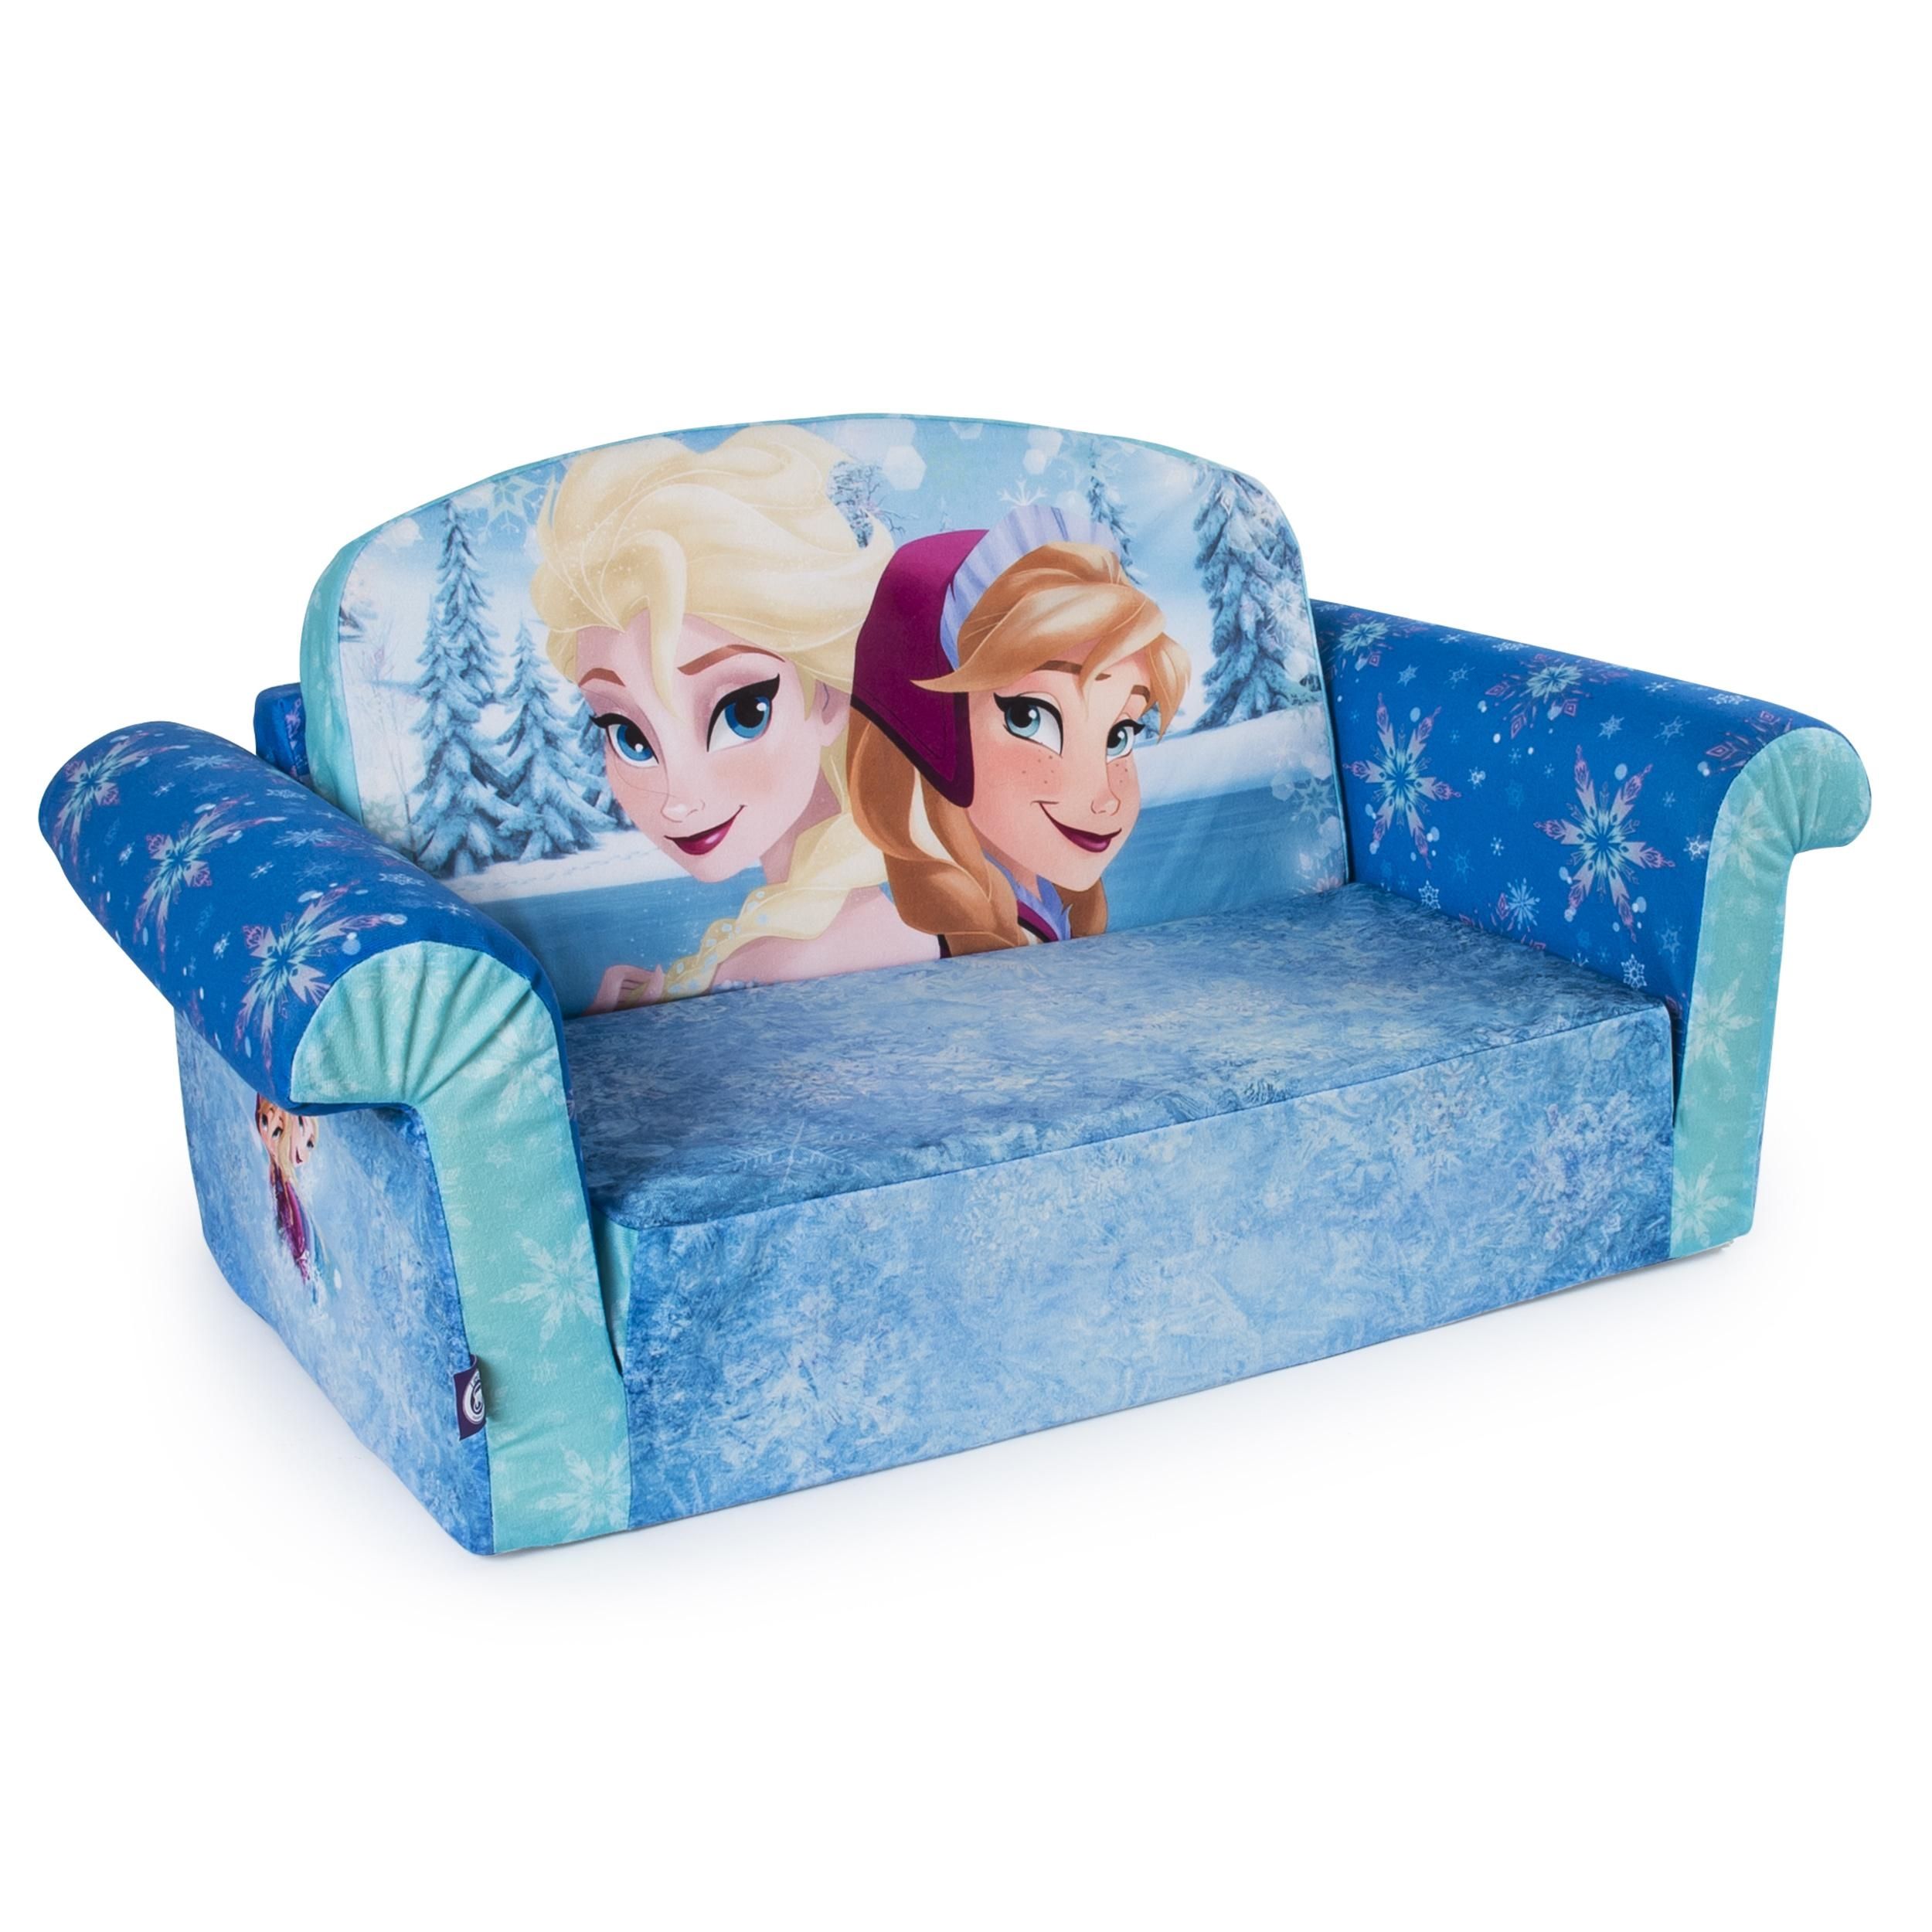 Marshmallow Furniture, Children's 2 In 1 Flip Open Foam Sofa Intended For Children Sofa Chairs (View 14 of 22)